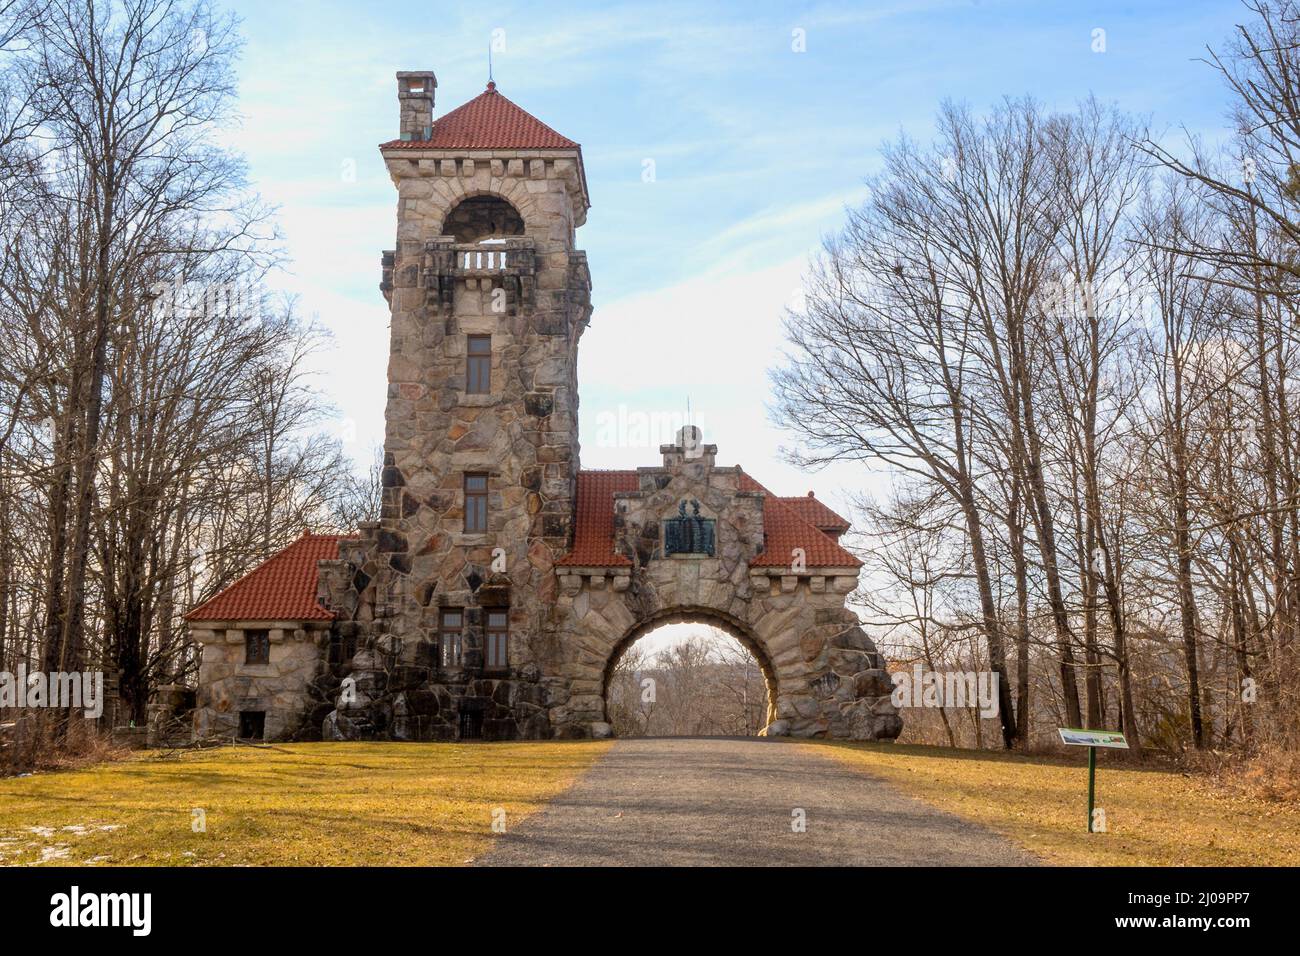 New Paltz, NY - USA - Mar 15, 2022: Landscape view of the historic Mohonk Testimonial Gateway. The stone gatehouse was built in 1908 and was the entra Stock Photo